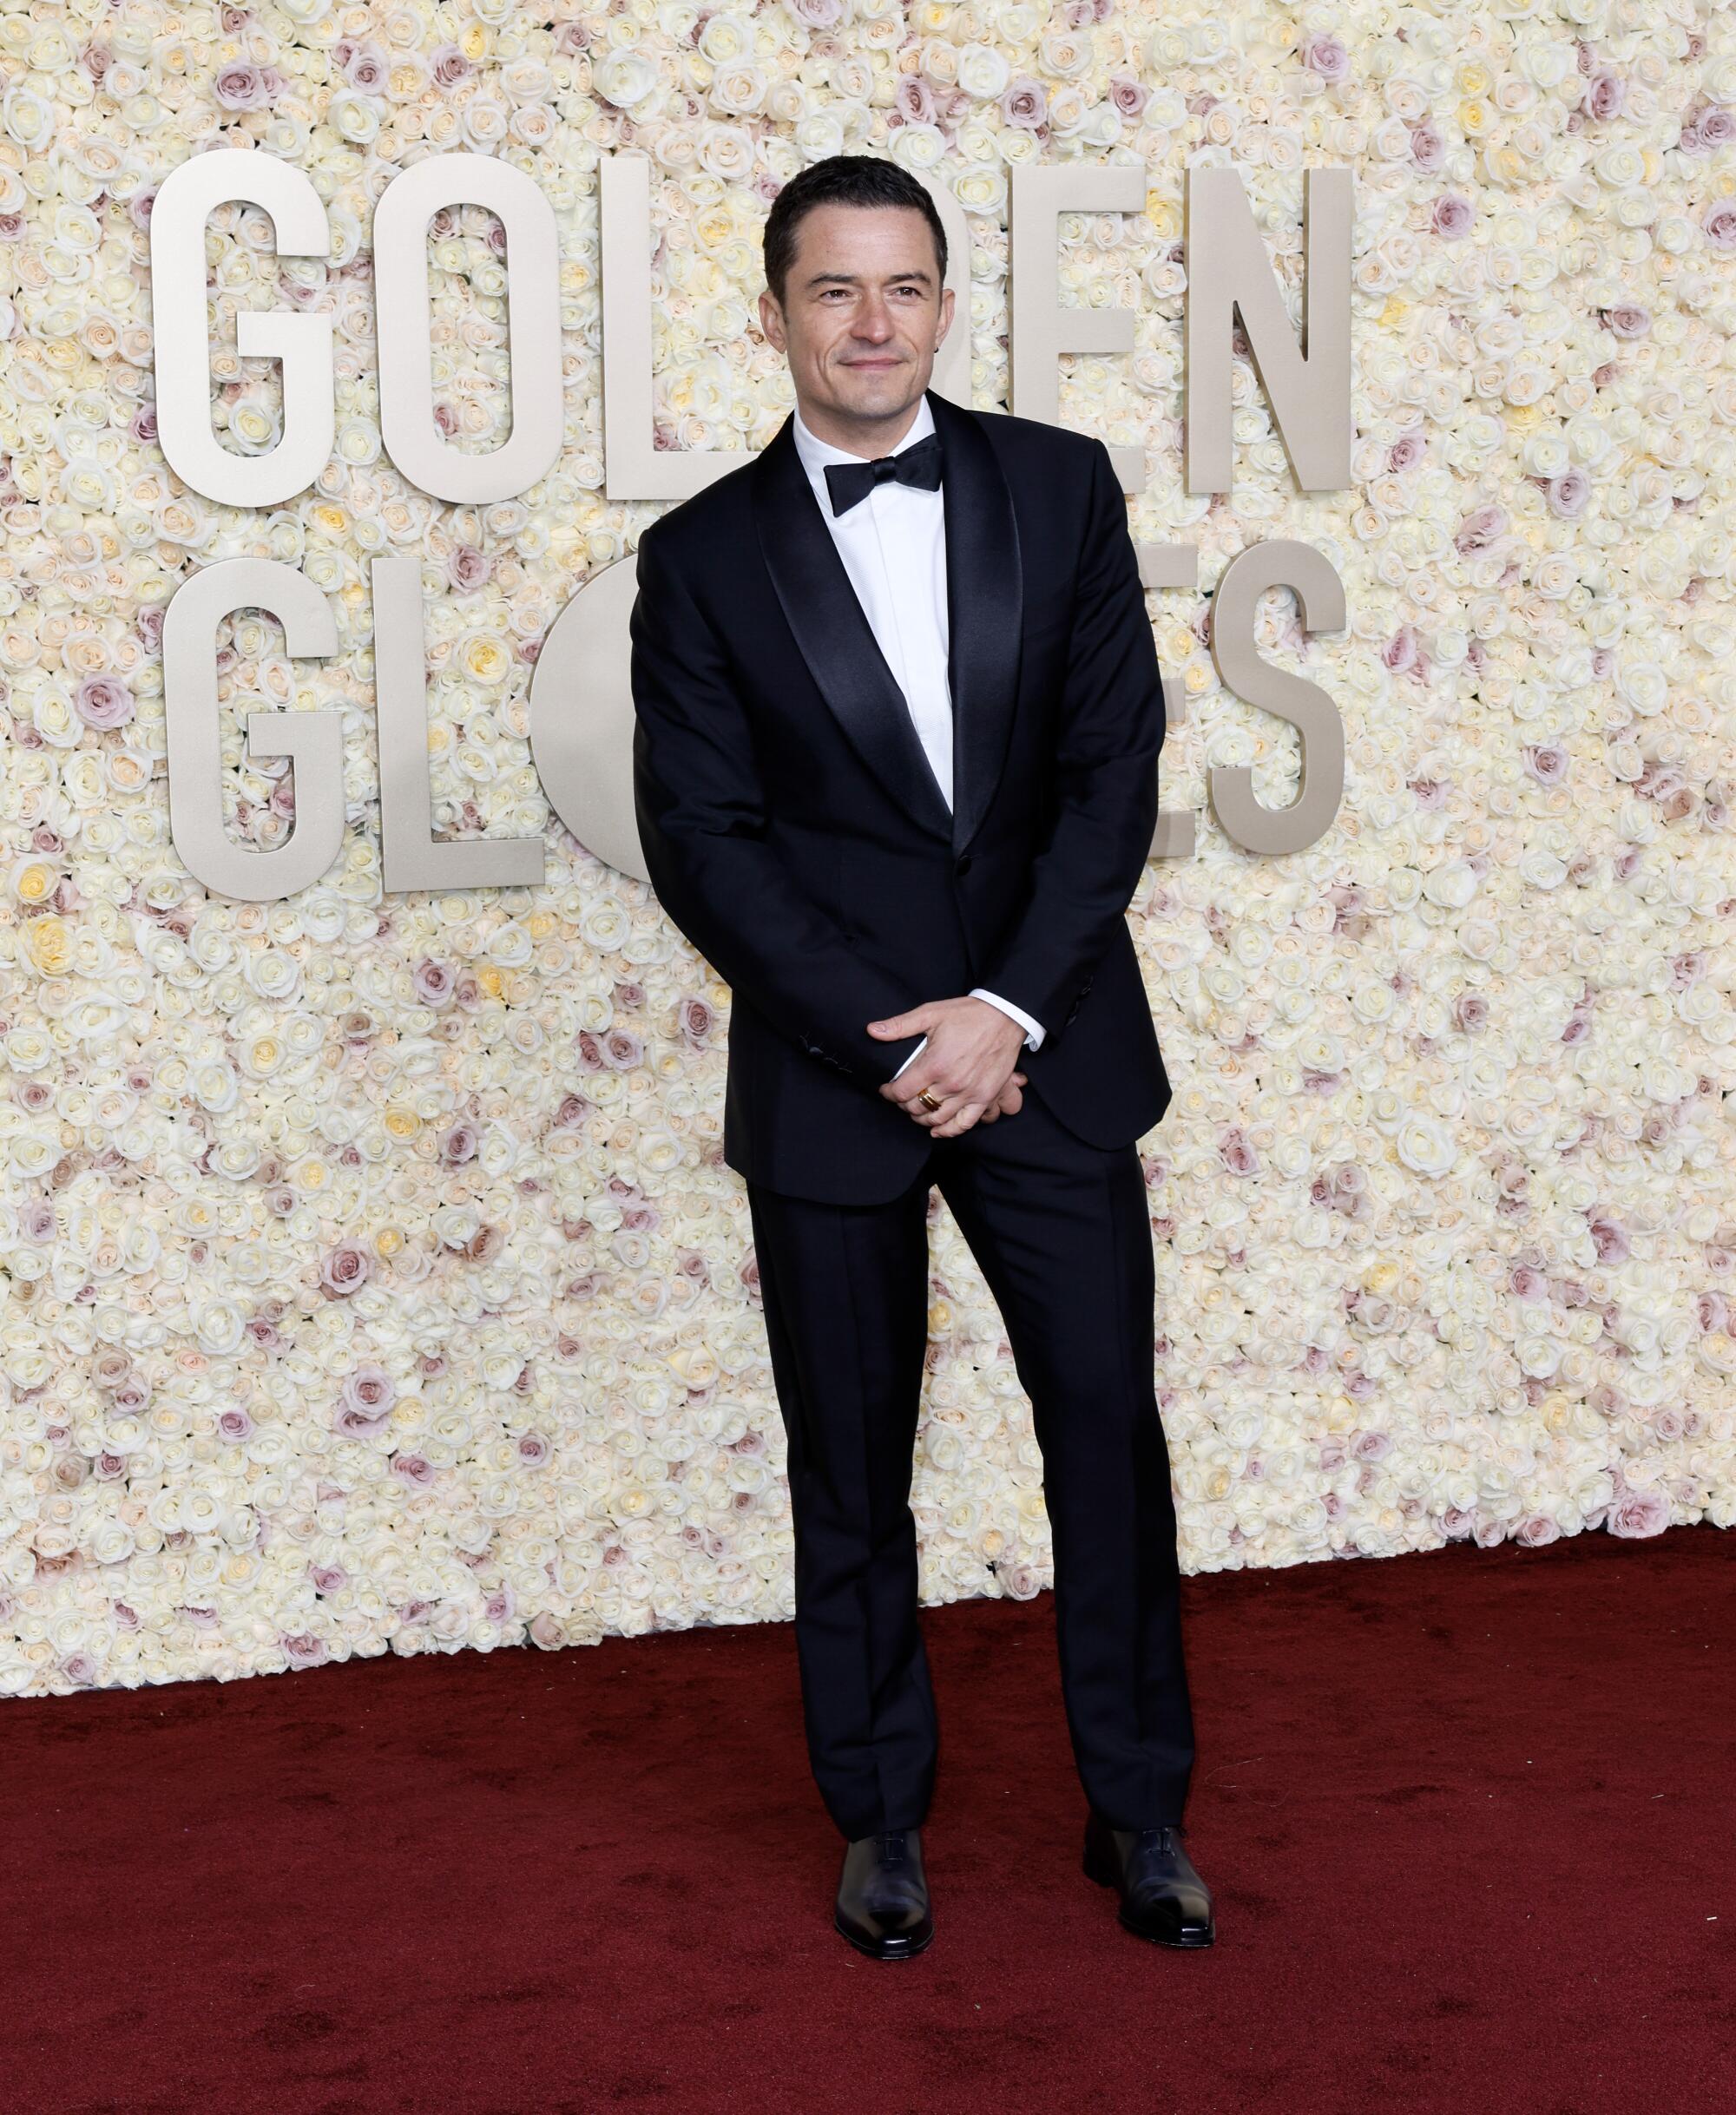 Orlando Bloom on the red carpet of the 81st Annual Golden Globe Awards held at the Beverly Hilton Hotel on January 7, 2024.